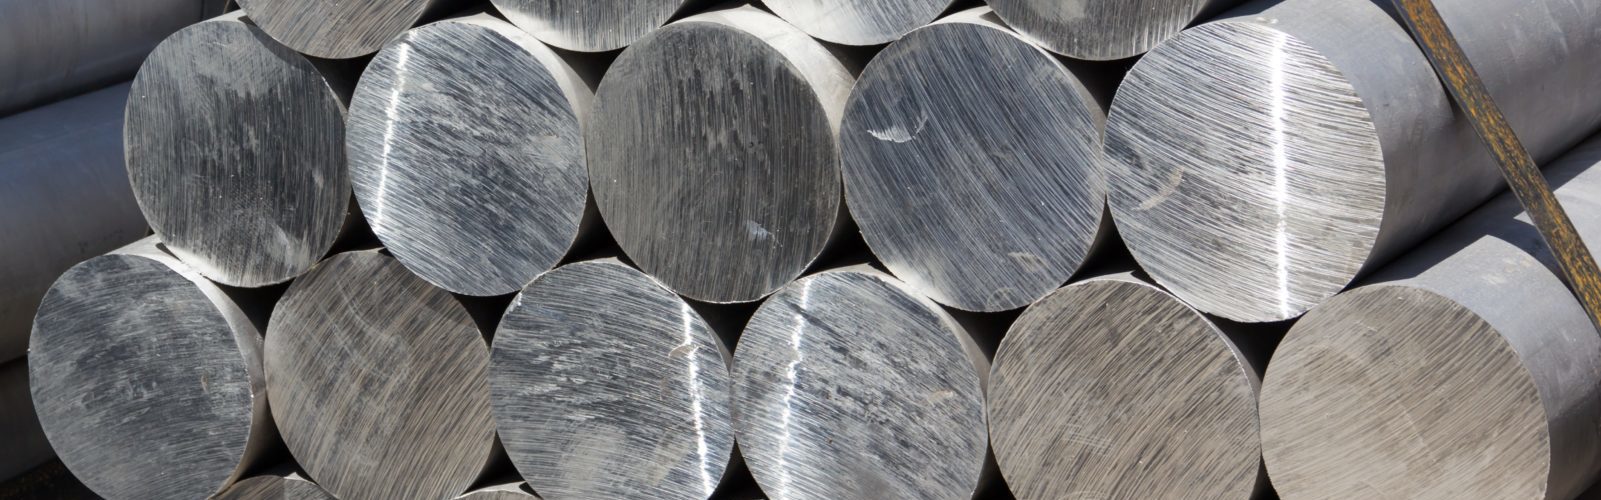 Steel and Aluminum Products and Processing in Wasilla